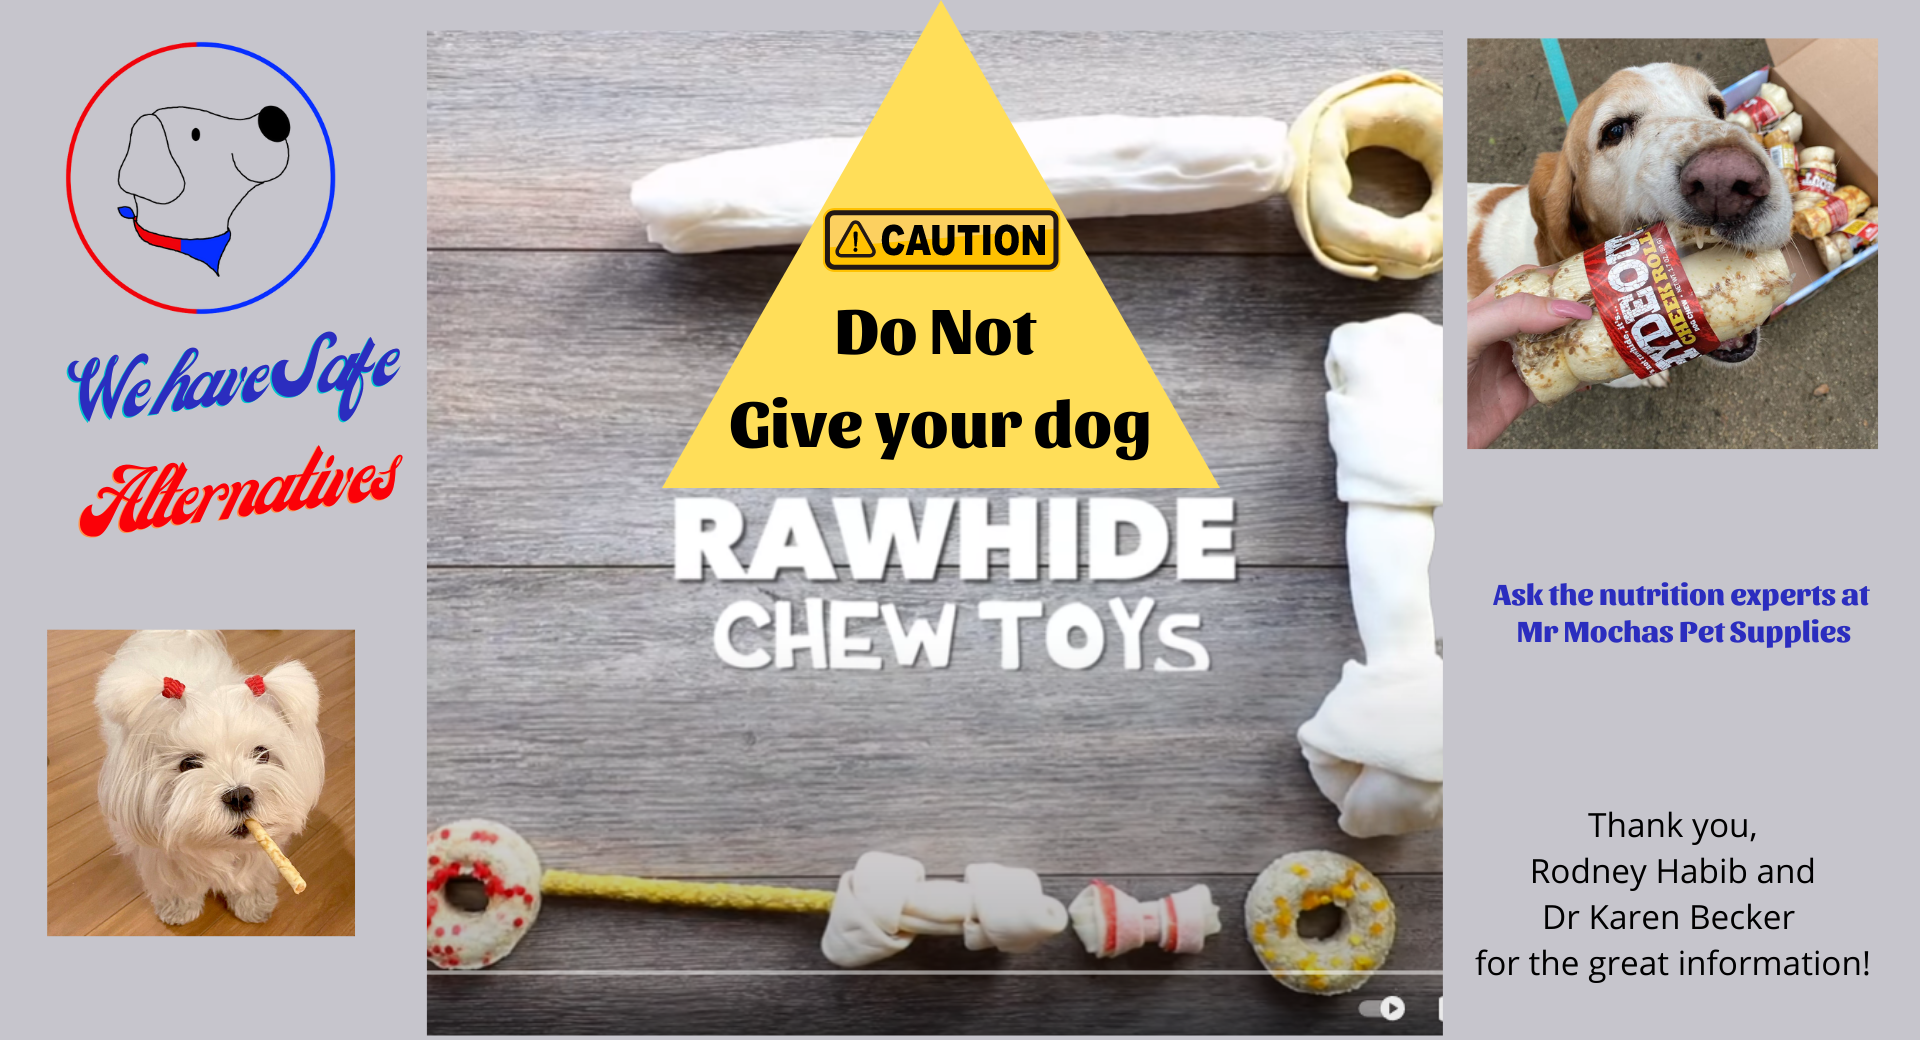 Don't Feed Dogs Rawhide!